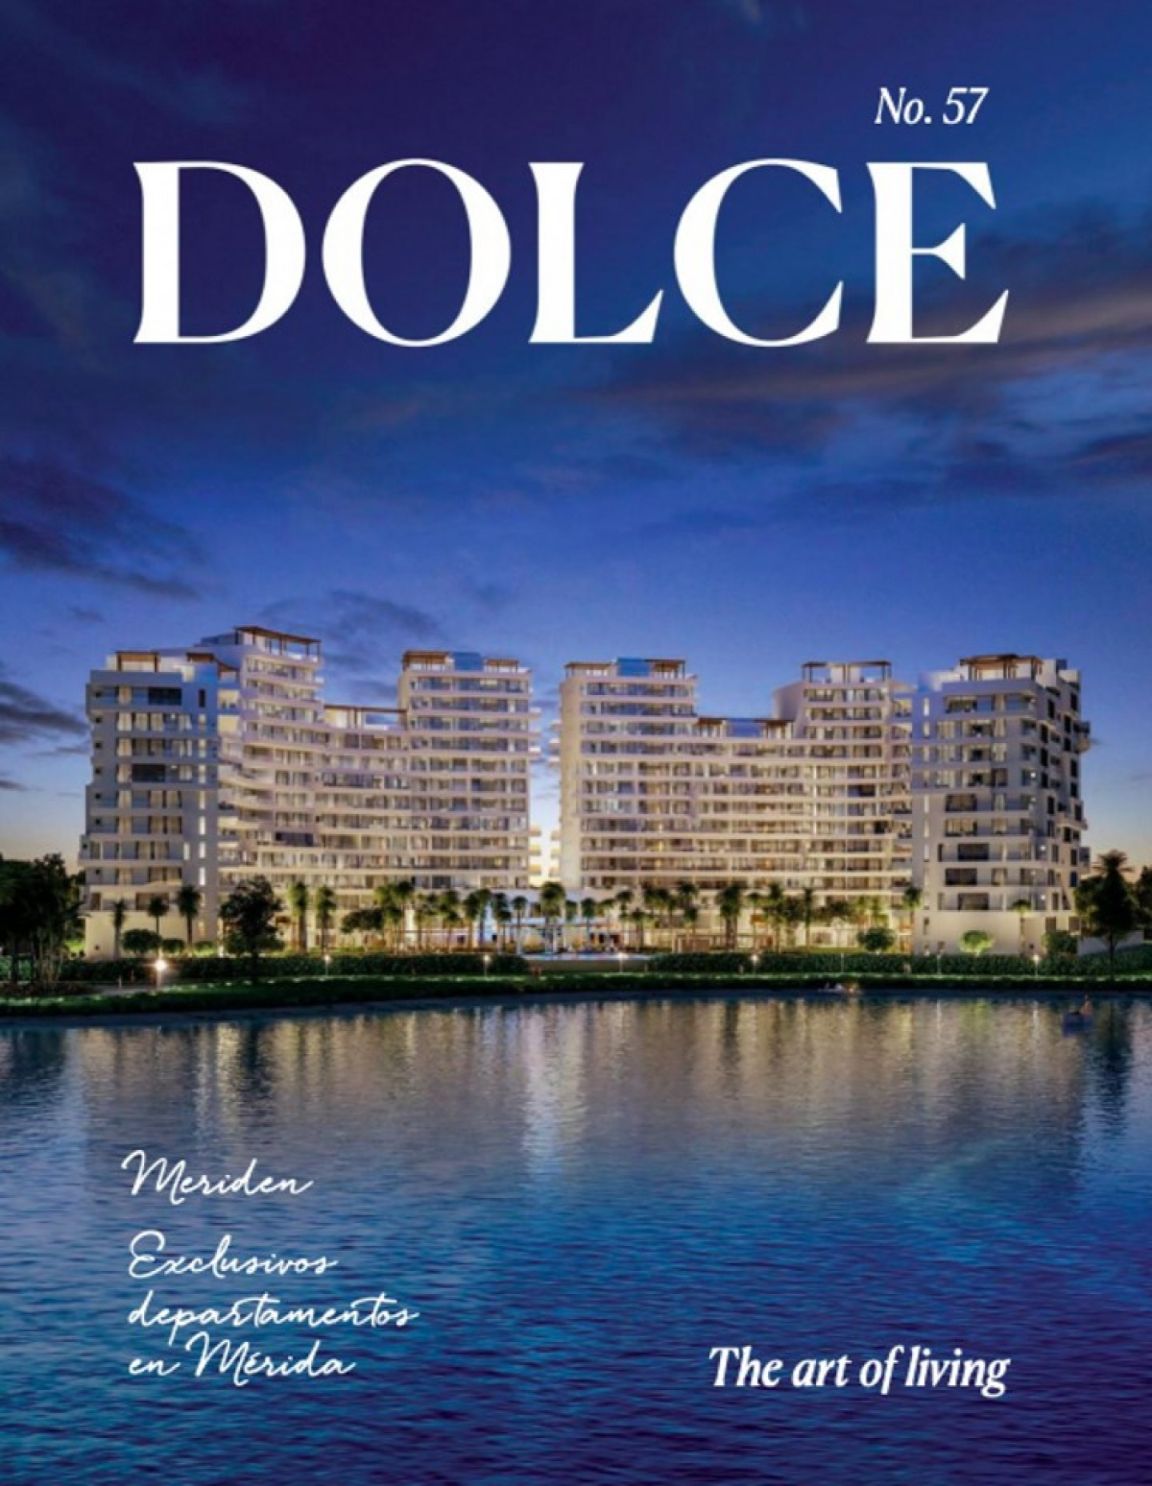 dolce 57